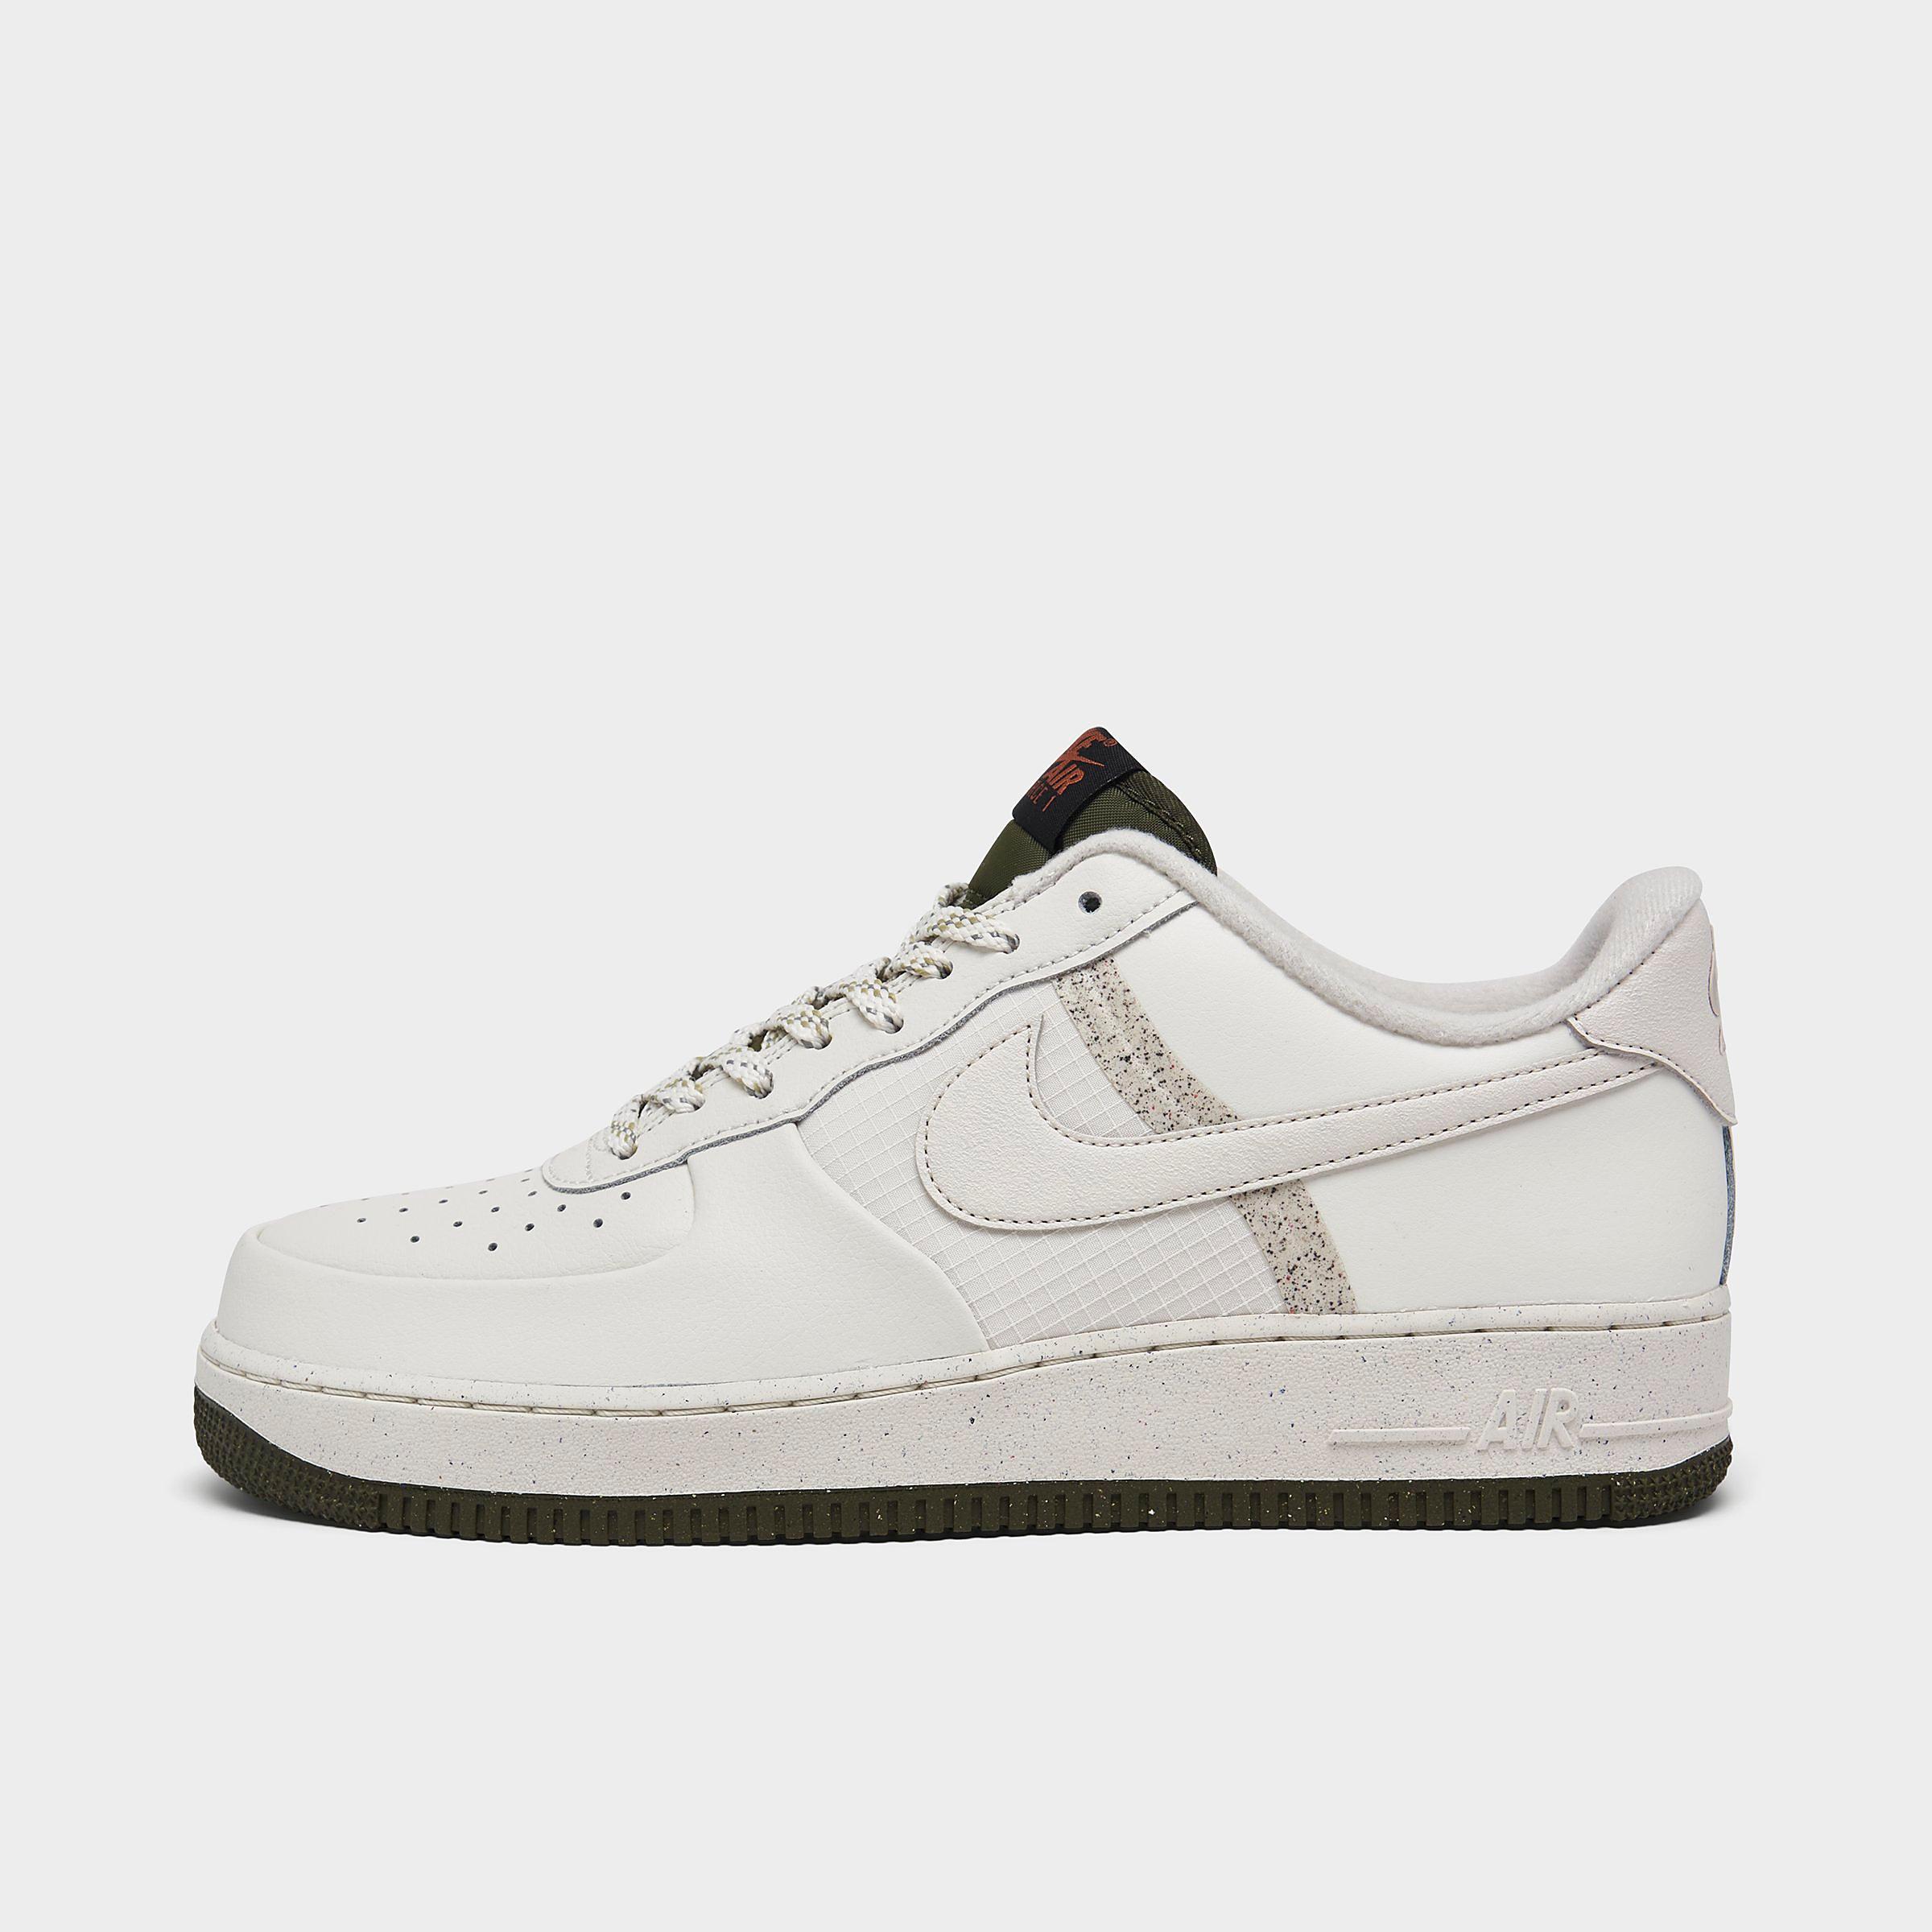 Mens Nike Air Force 1 07 LV8 Winterized Low Casual Shoes